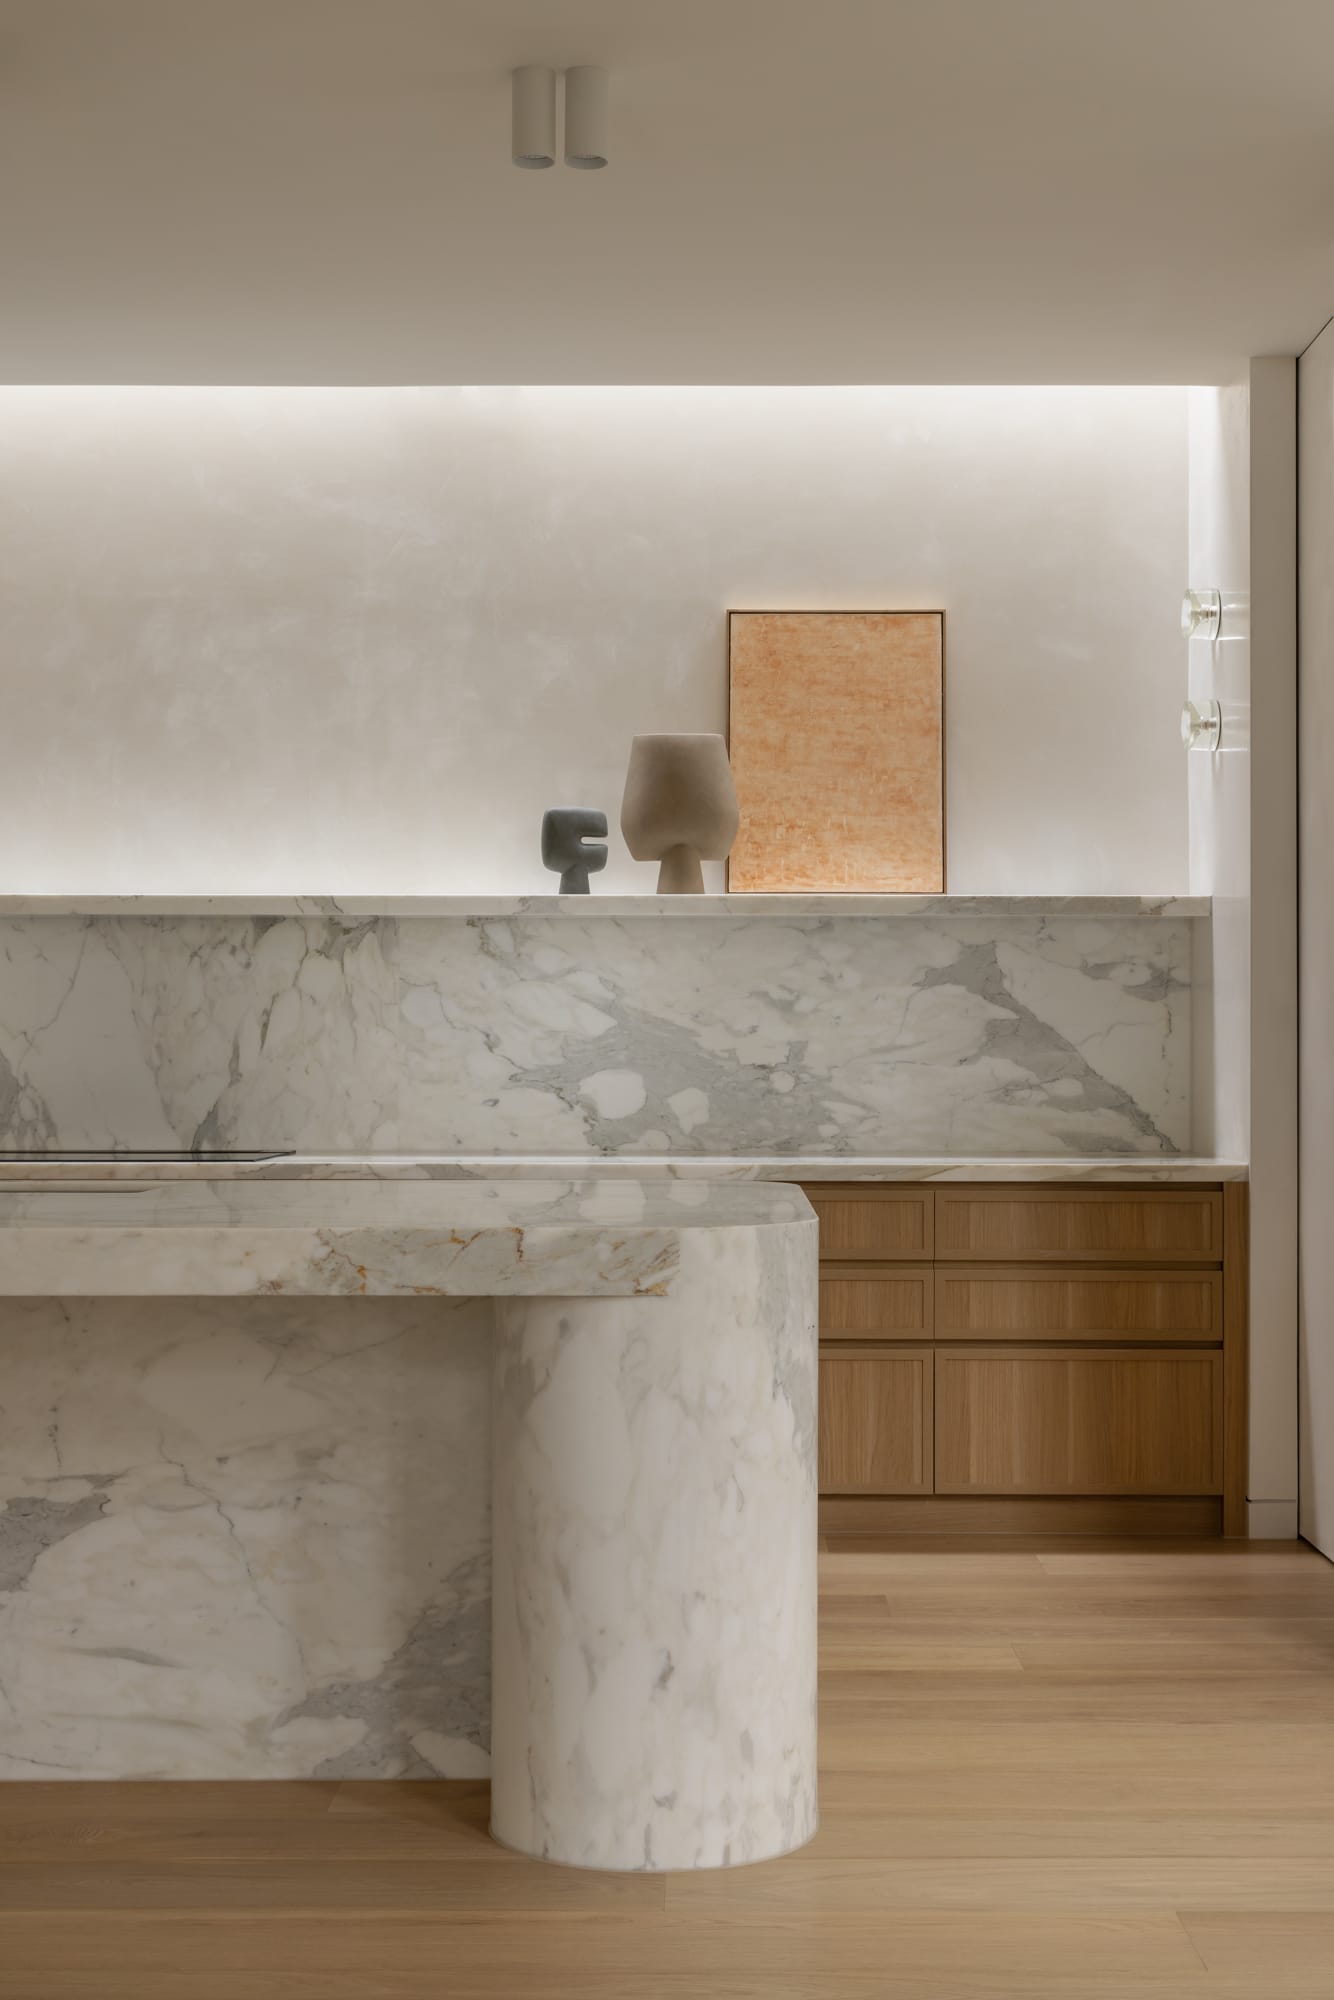 An interior shot of the kitchen at Balwyn House showing the white marble island bench and timber joinery